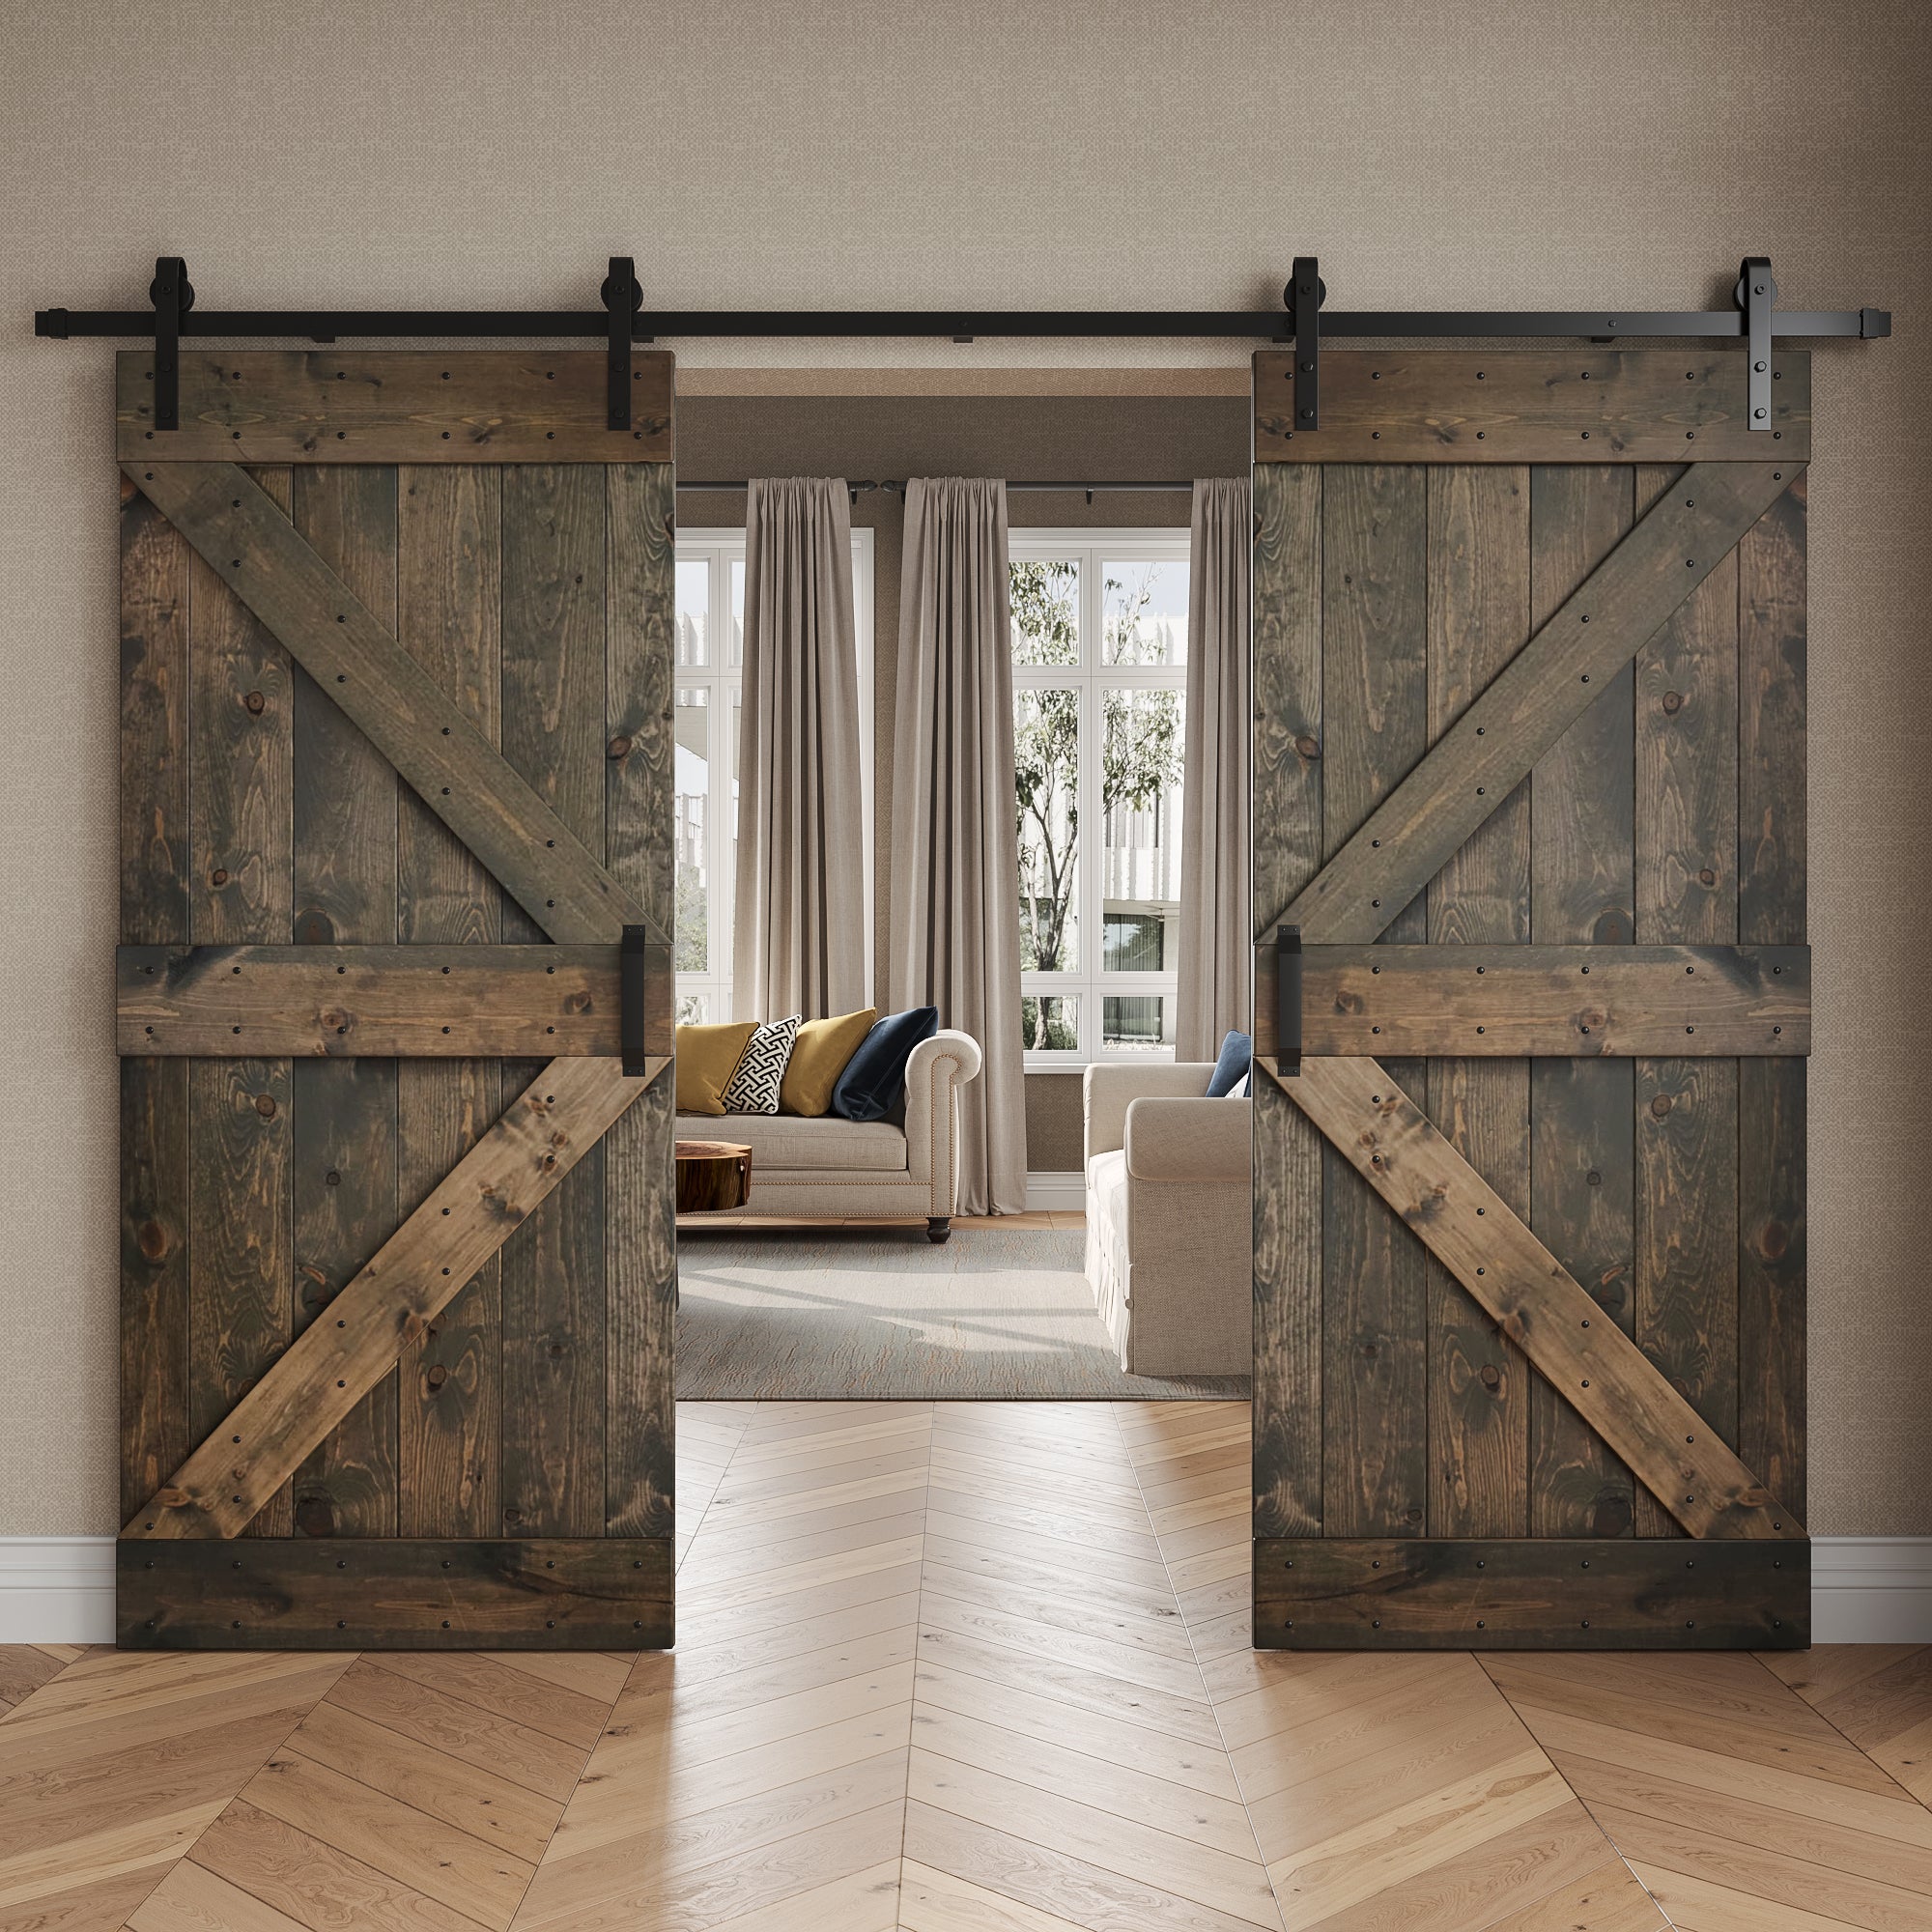 K Series  48 in/60 in/72 in/76 in/84 in x 84 in  DIY Finished Knotty Pine Wood Double Sliding Barn Door With Hardware Kit